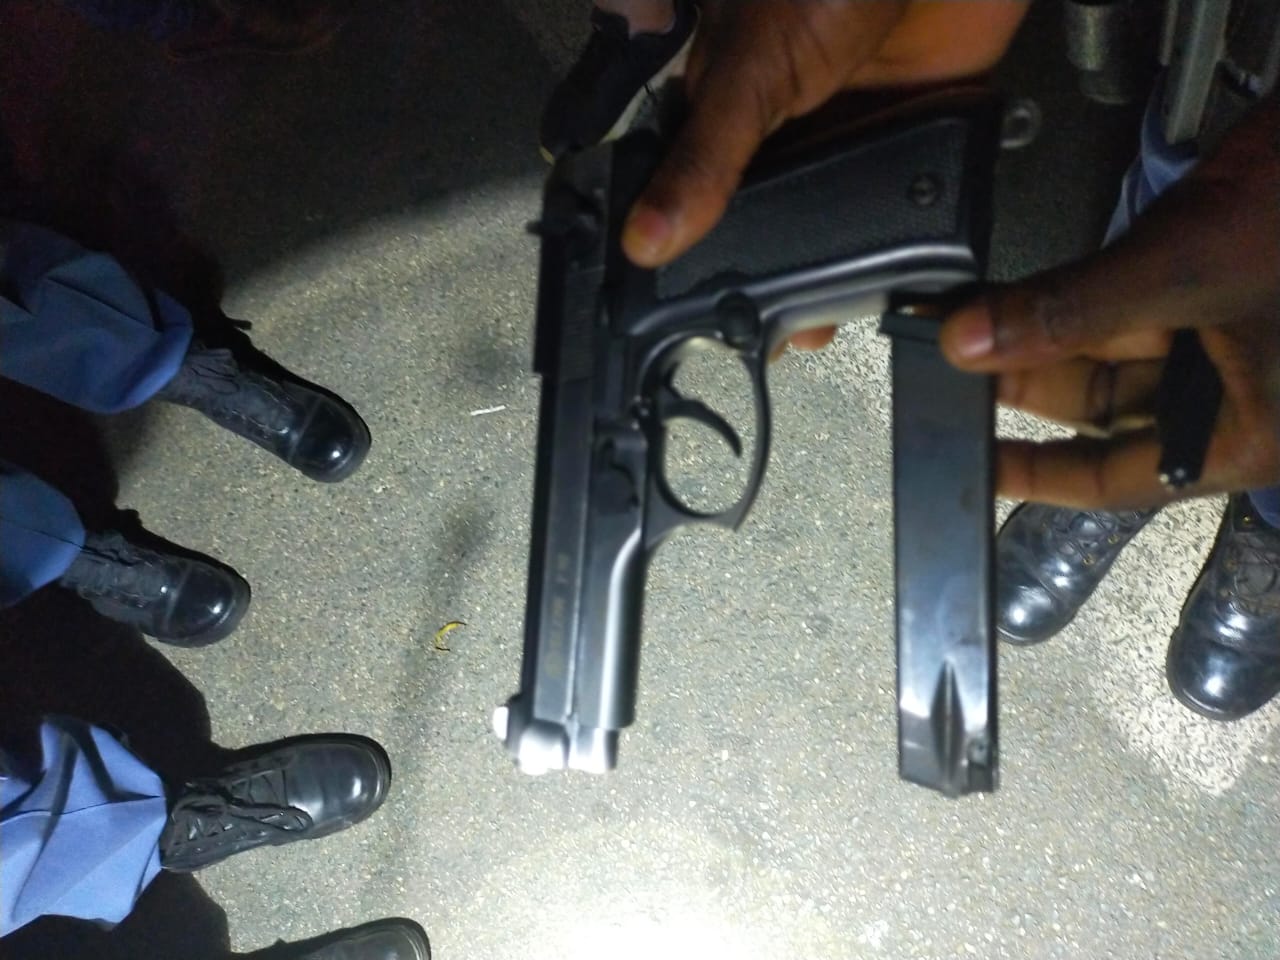 Gauteng police continue to make inroads in recovering unlicensed firearms and ammunition